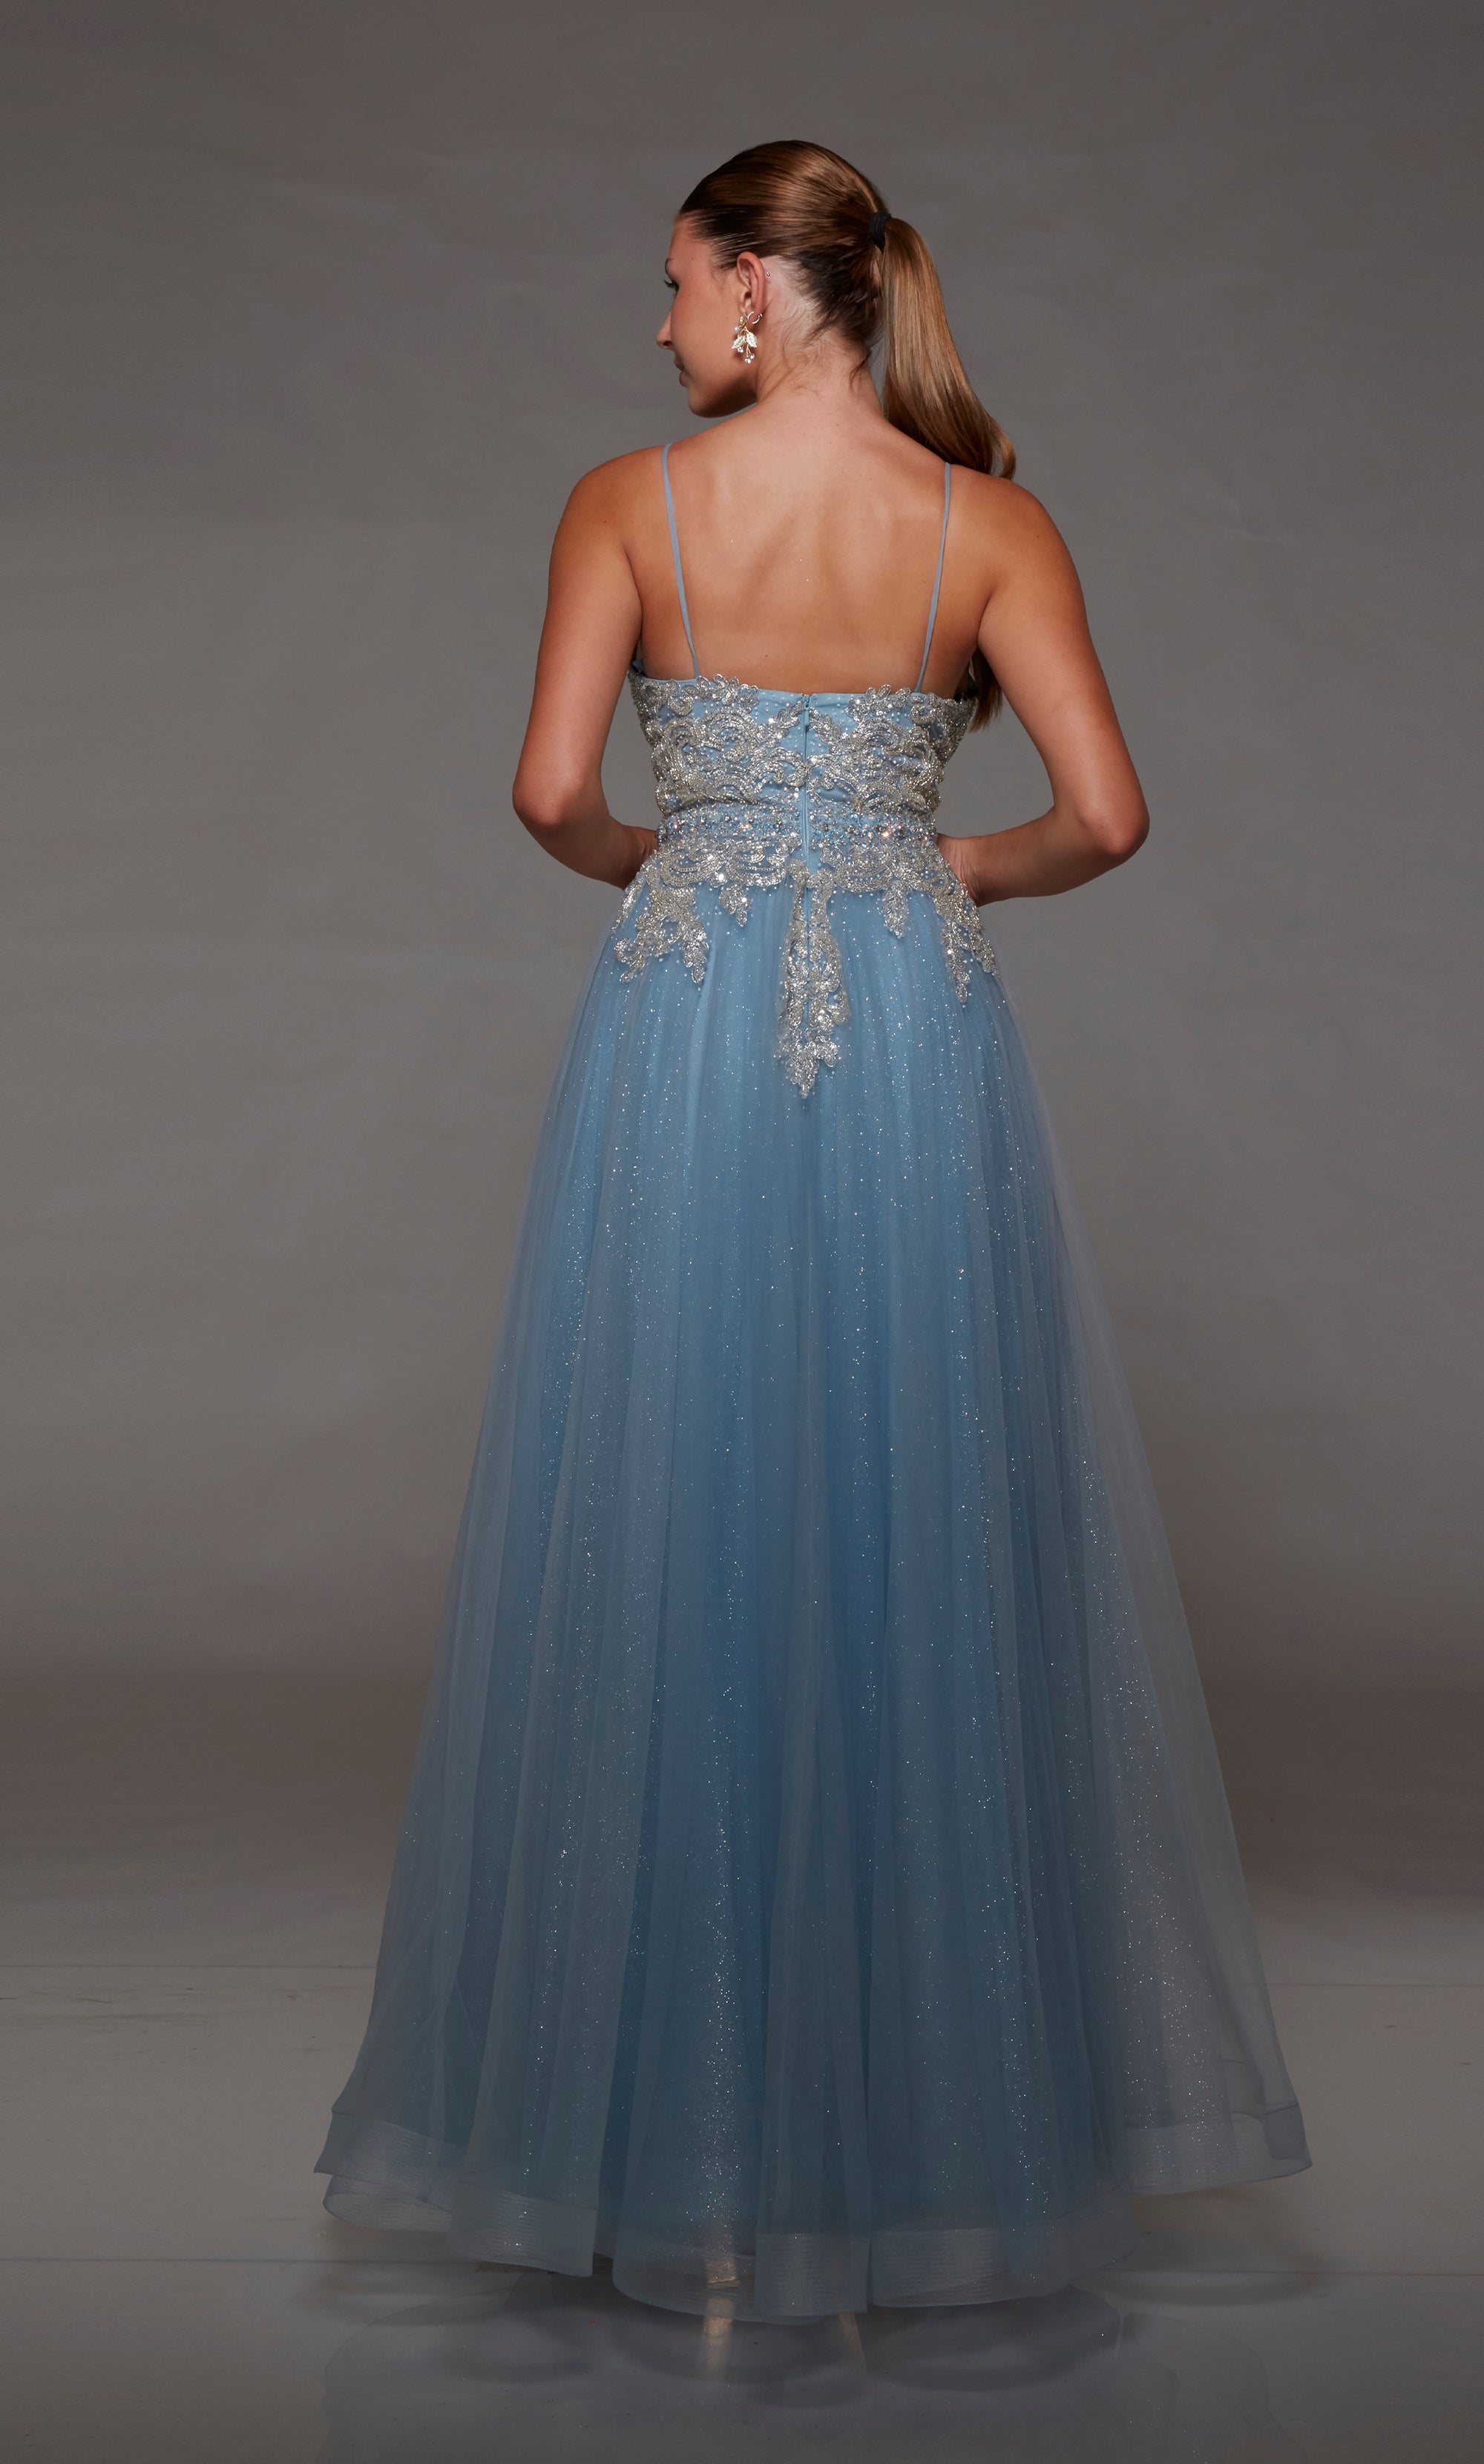 French blue glitter tulle formal dress: Plunging neckline, beaded lace bodice, zip-up back, and spaghetti straps for an elegant and enchanting look.